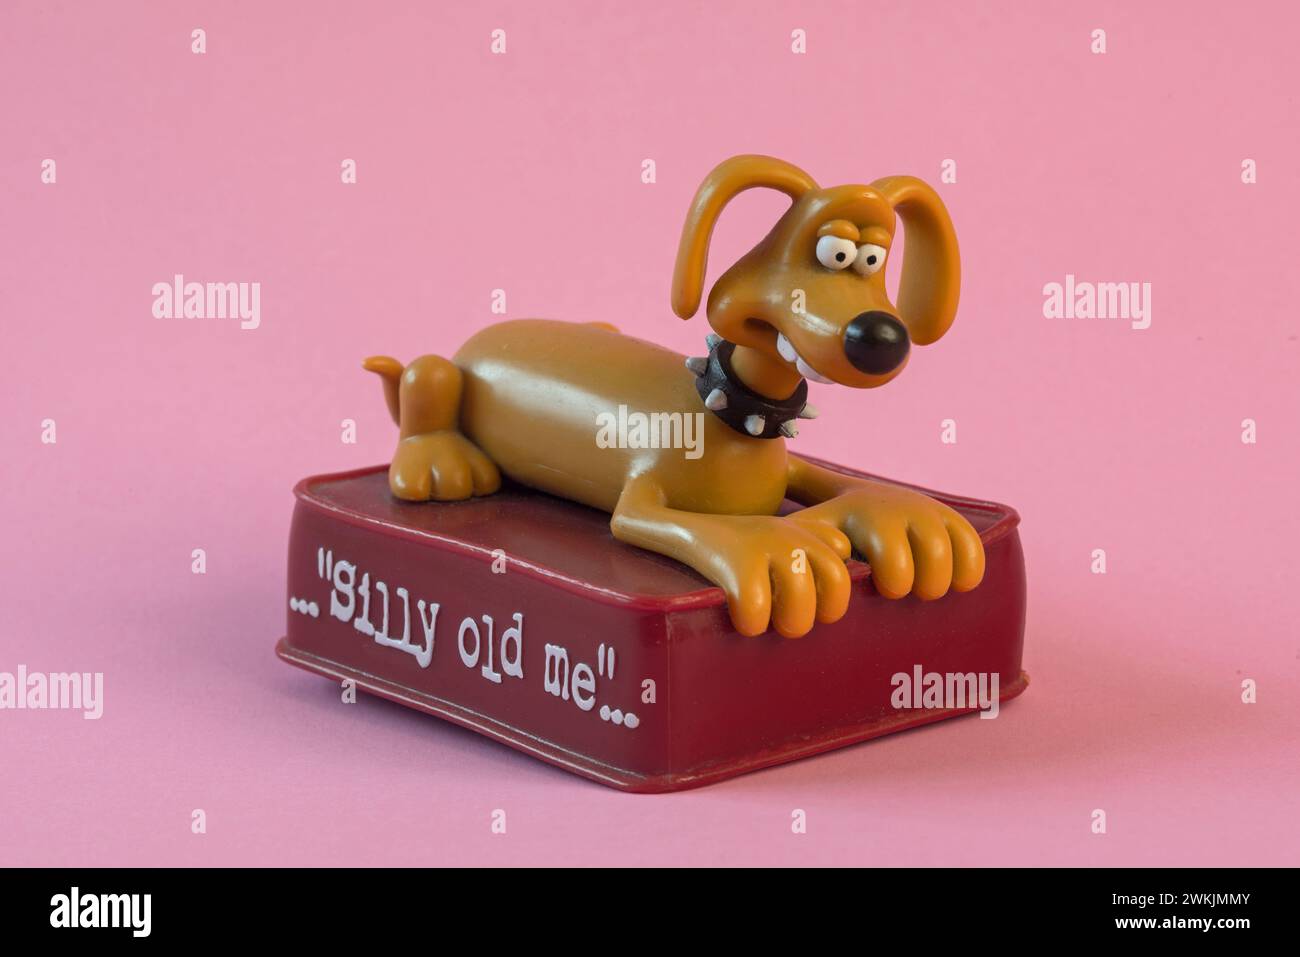 Novelty air freshener: Aardman Animations - Creature Comforts Trixie the dog 'silly old me' Stock Photo